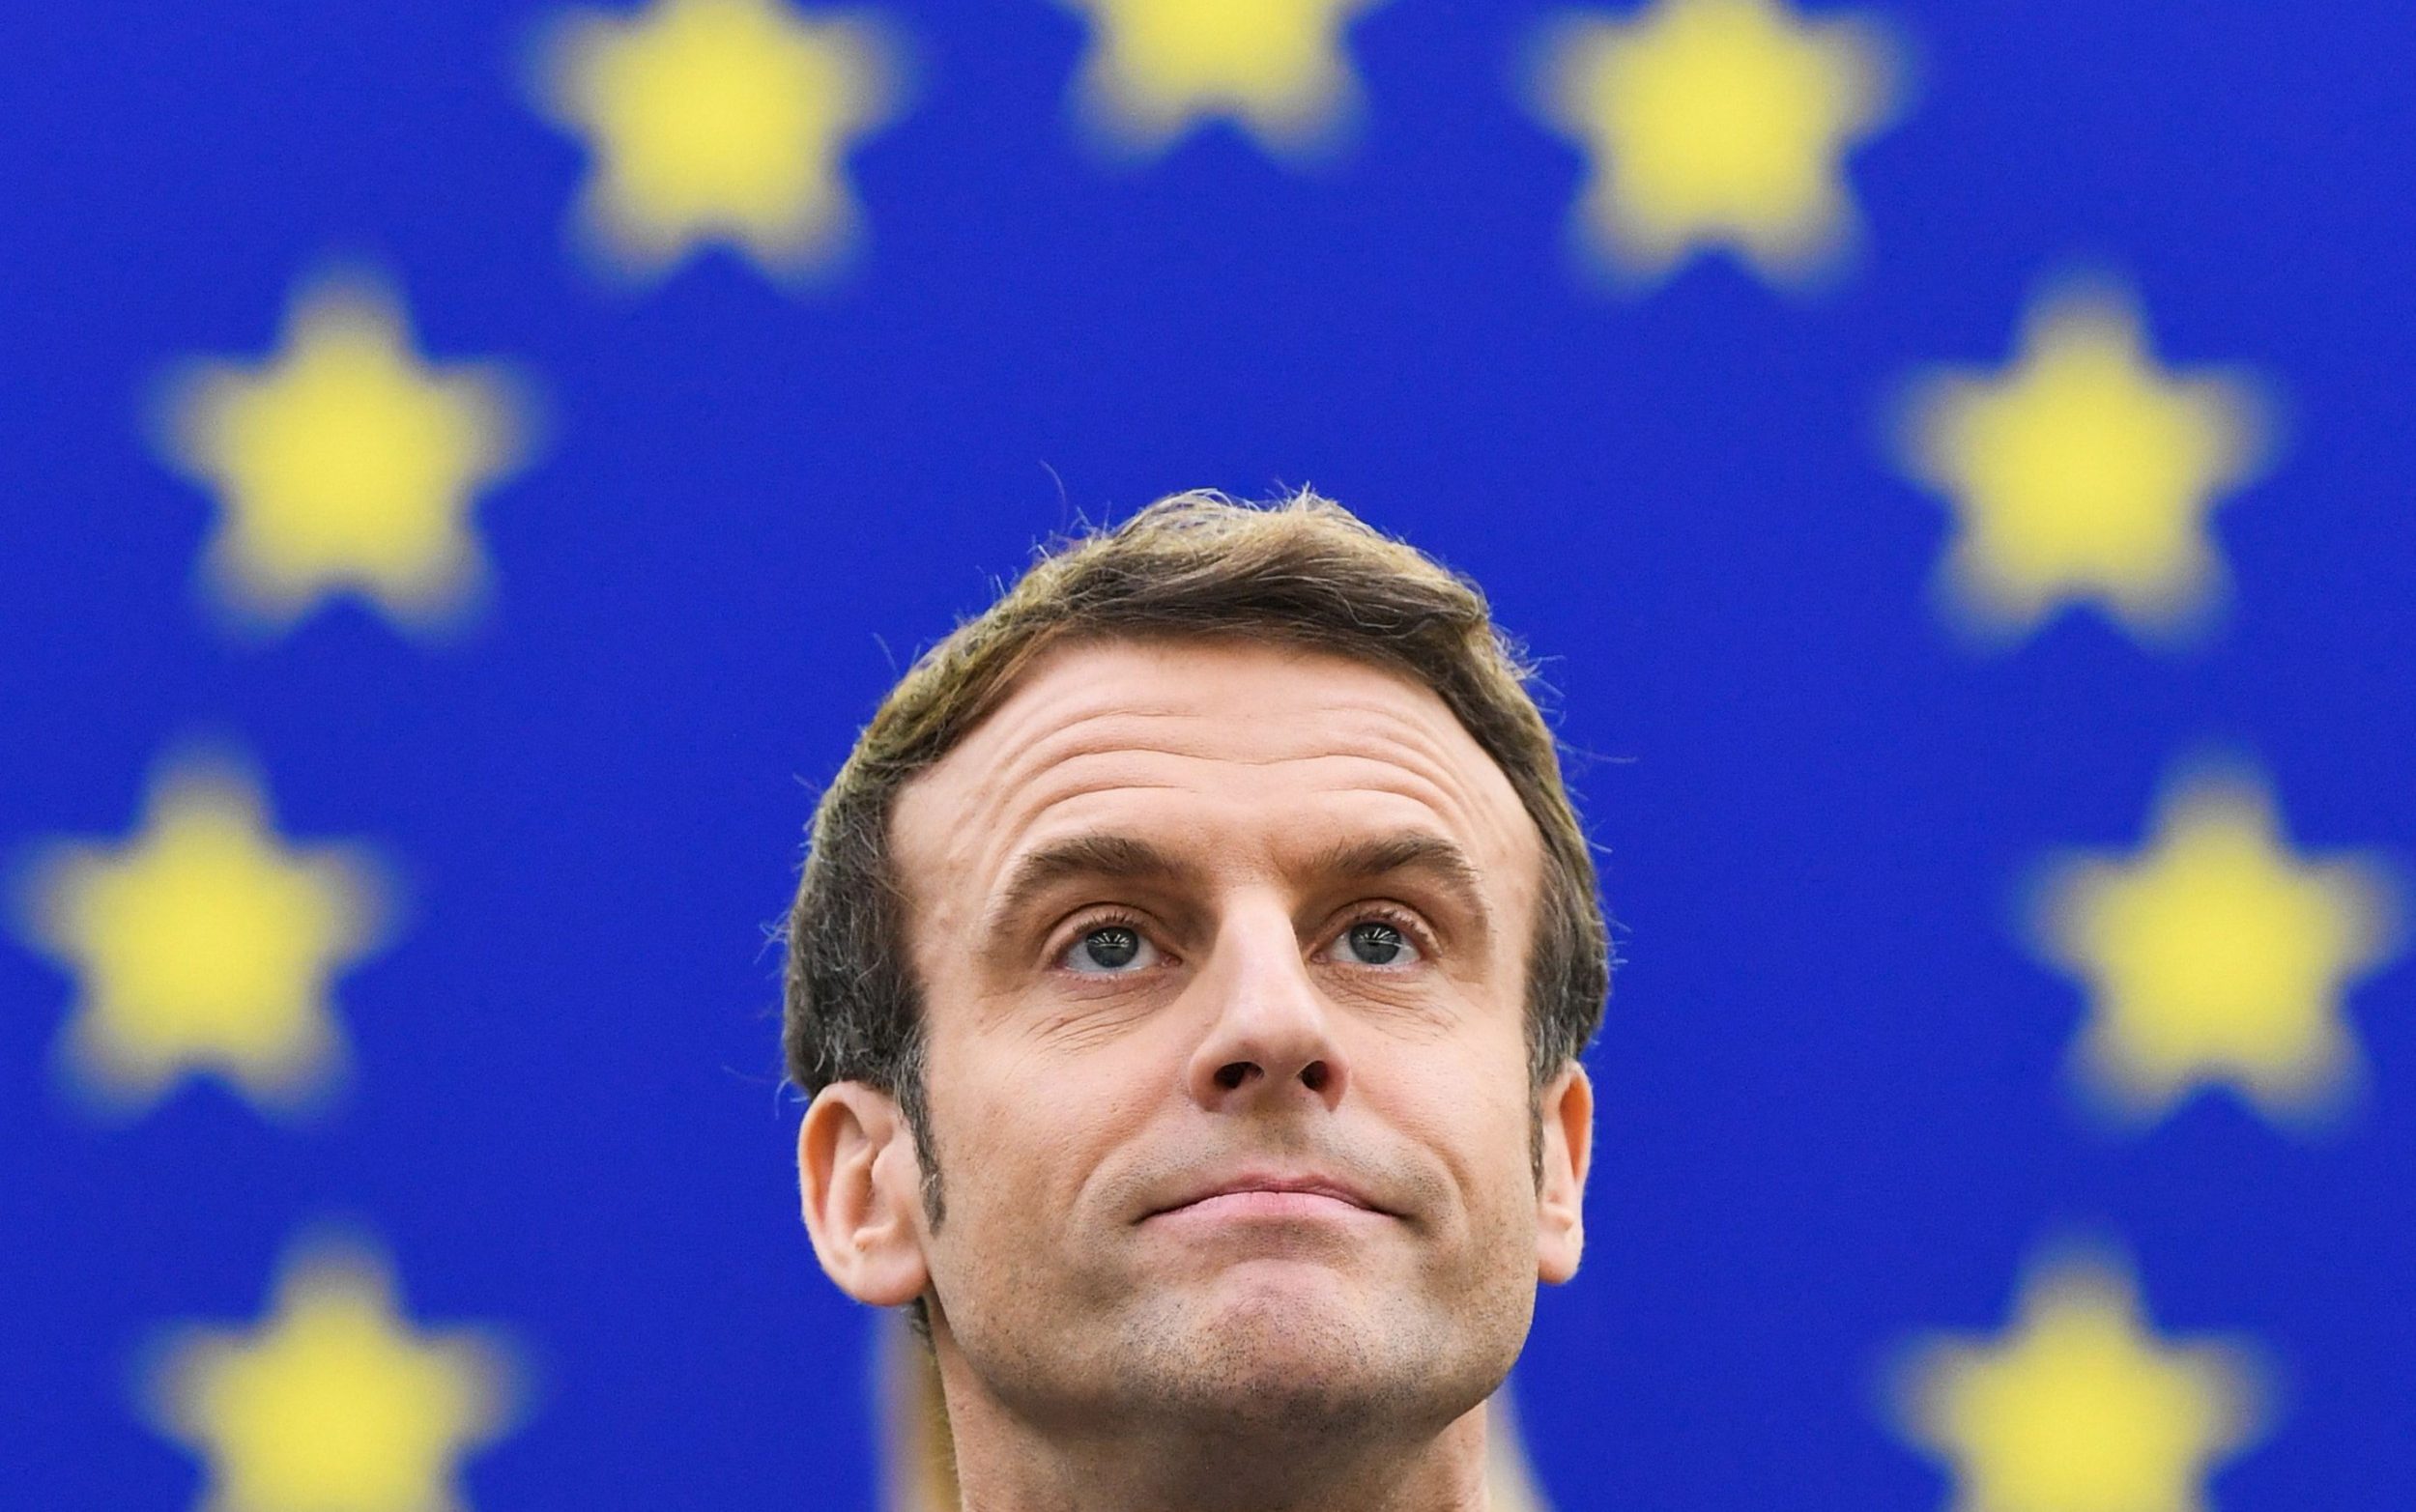 french are the most eurosceptic people in europe, poll finds